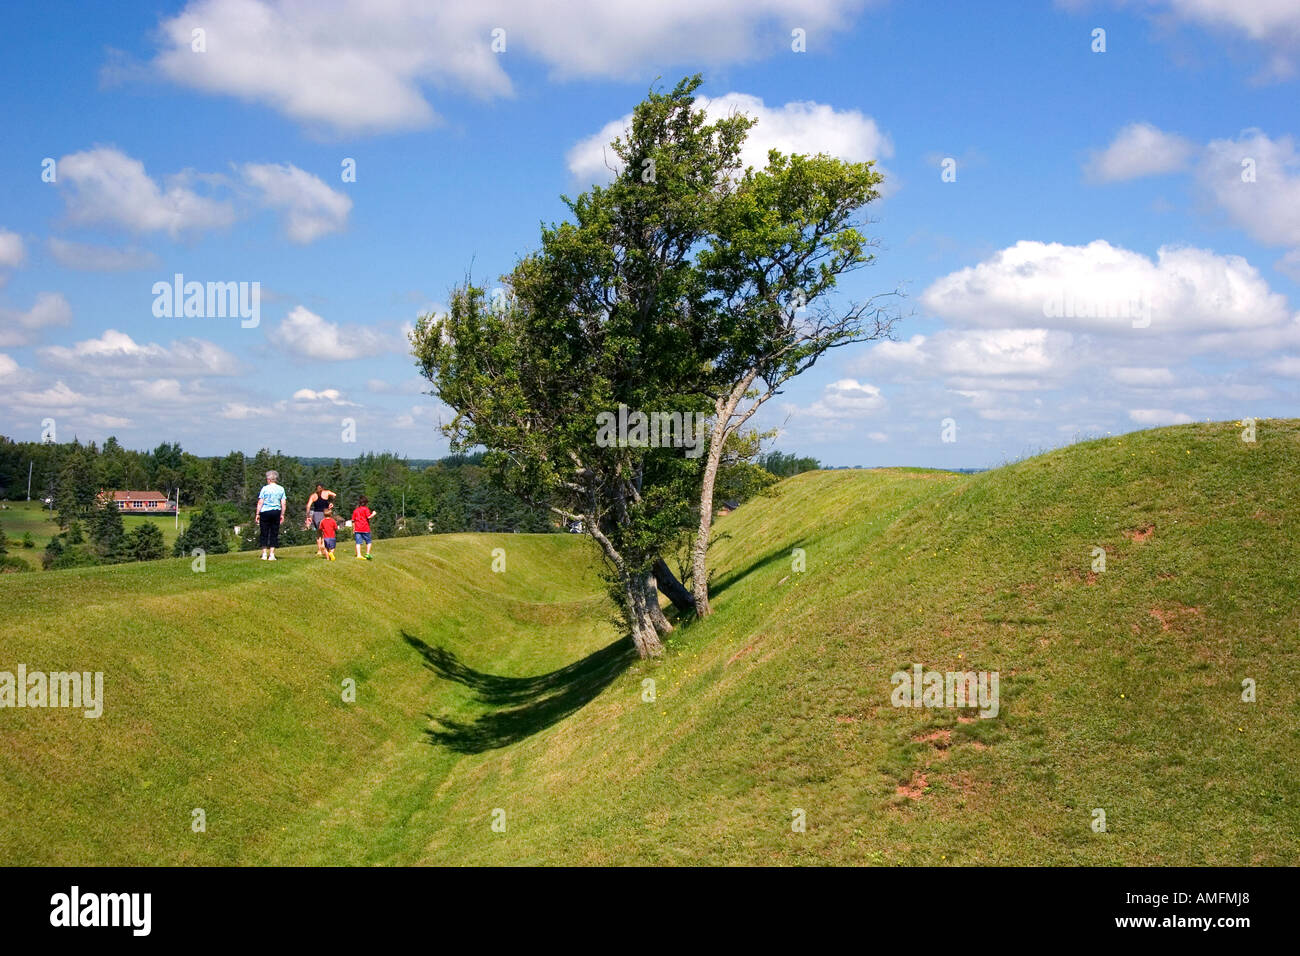 Hikers on a trail at Ft. Amherst near Charlottetown on Prince Edward Island, Canada. Stock Photo